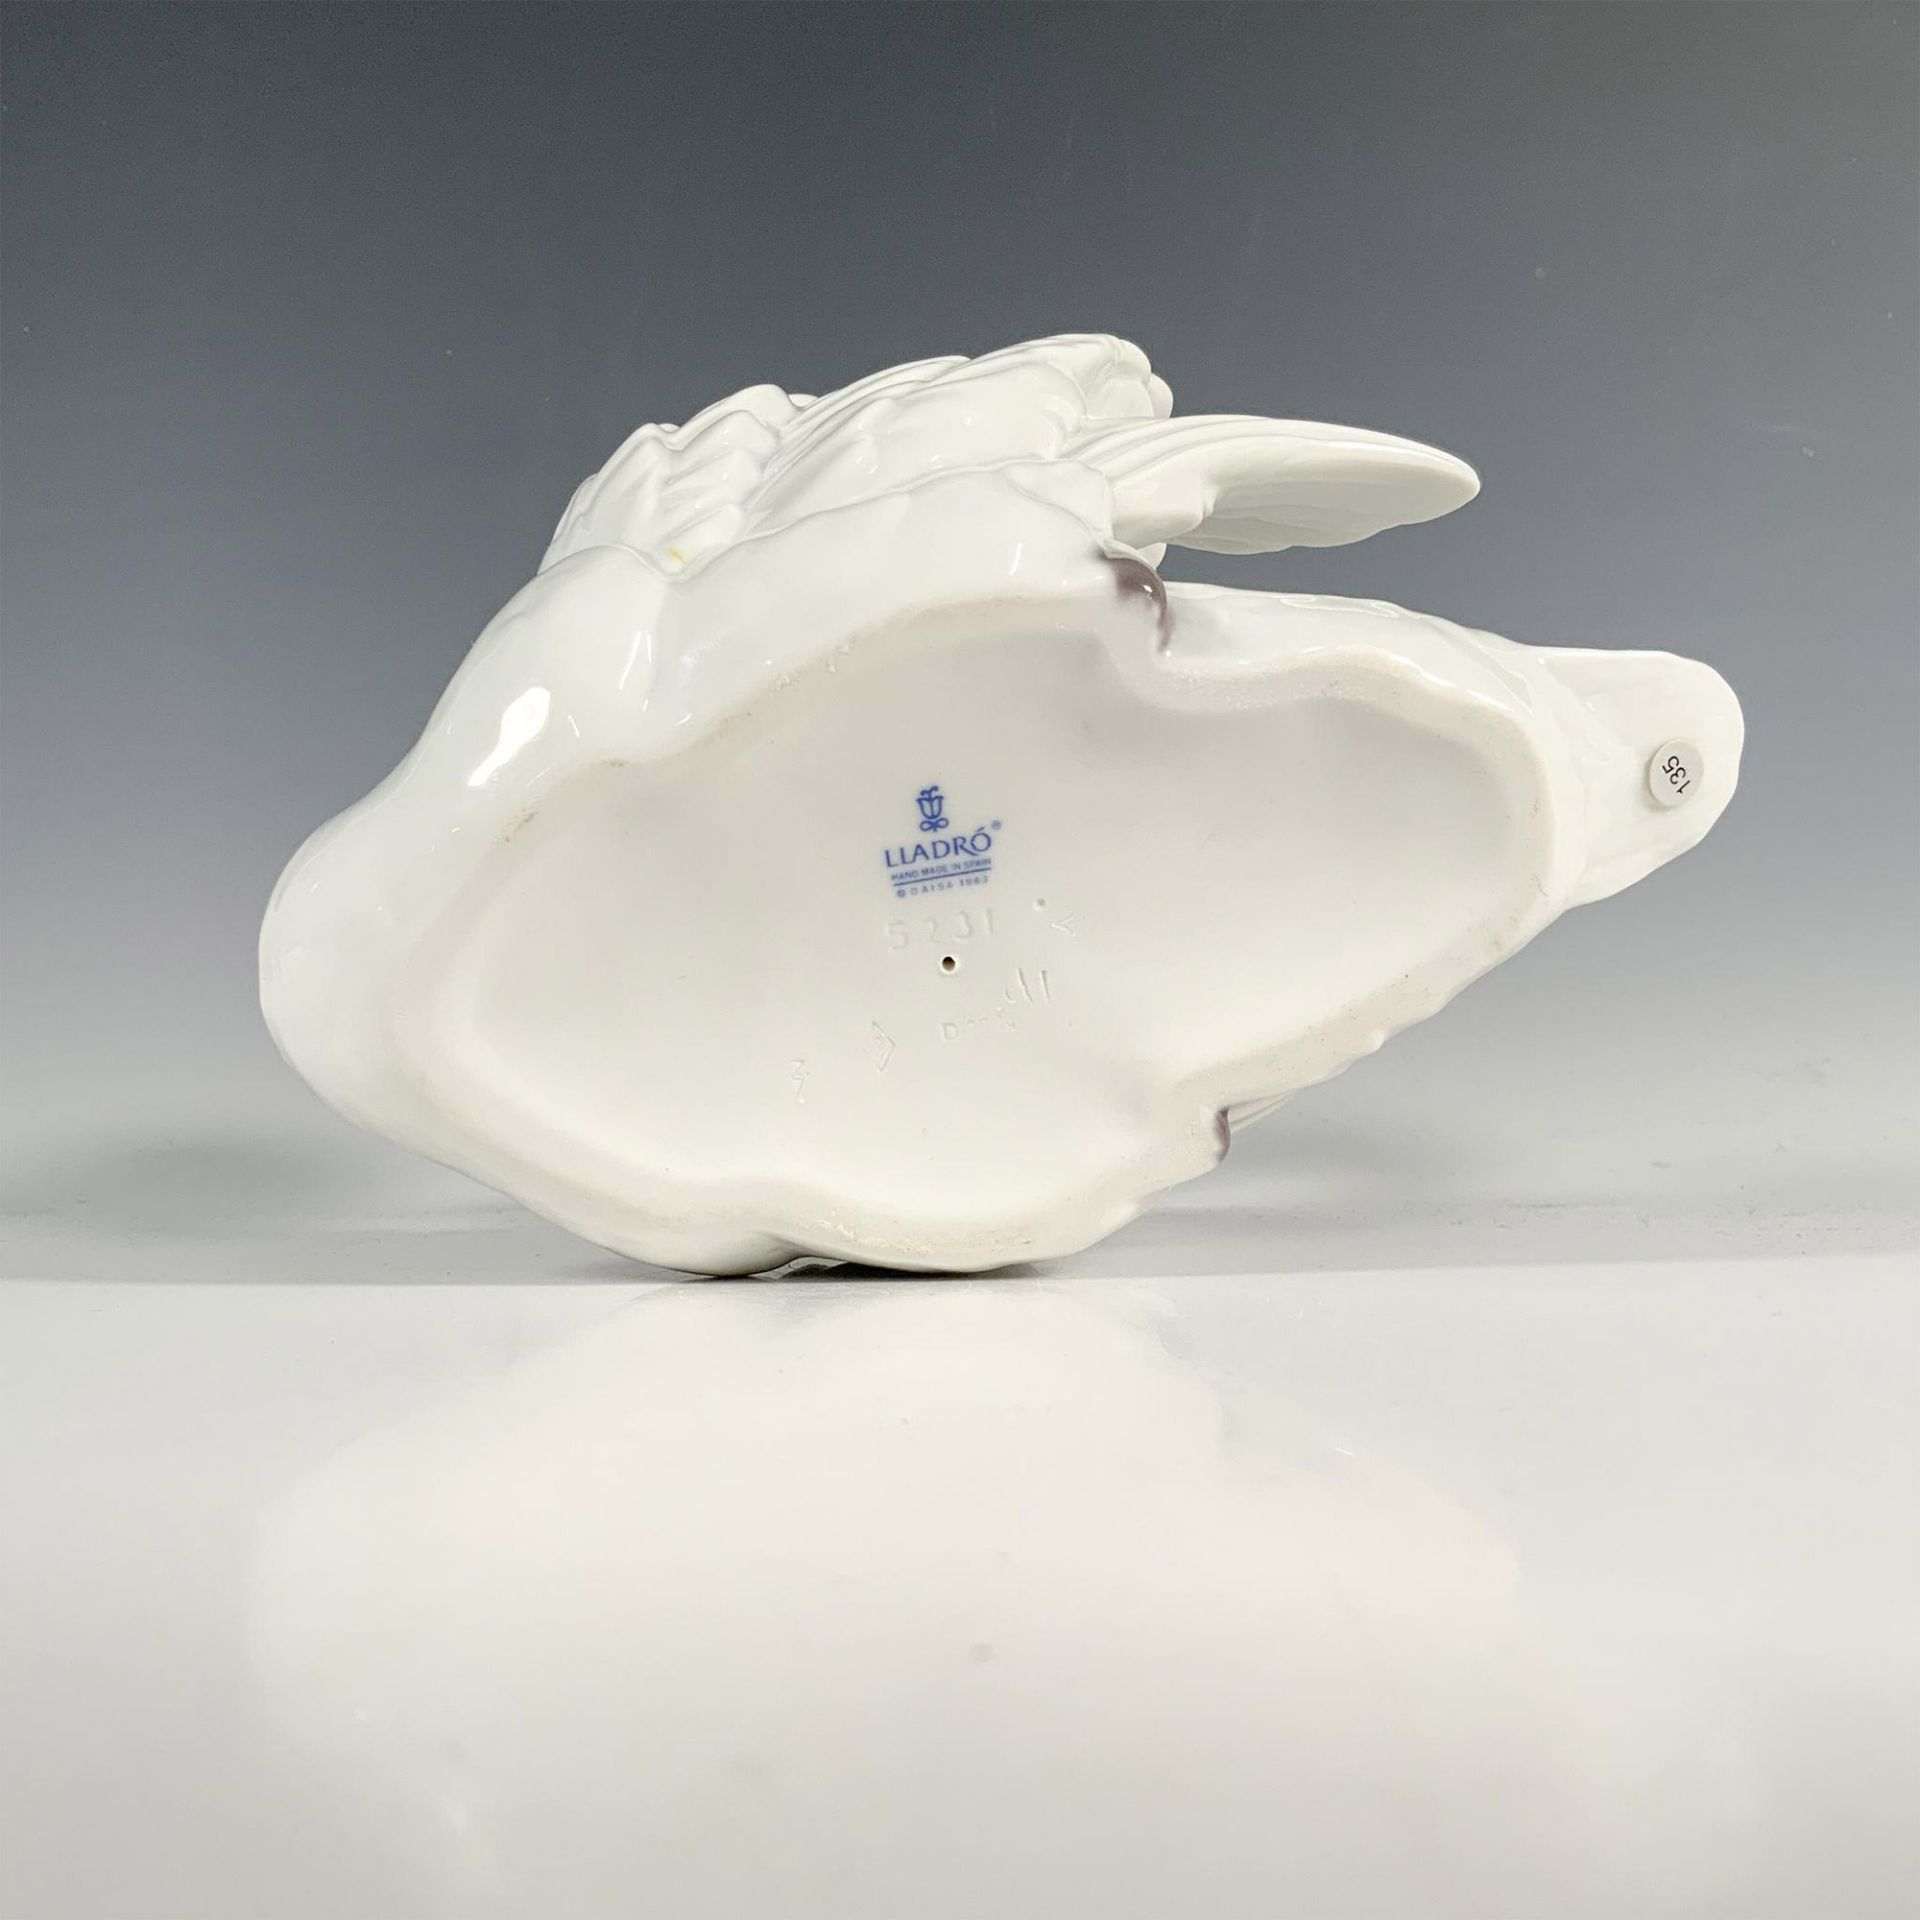 Swan With Wings Spread 1005231 - Lladro Porcelain Figurine - Image 3 of 4